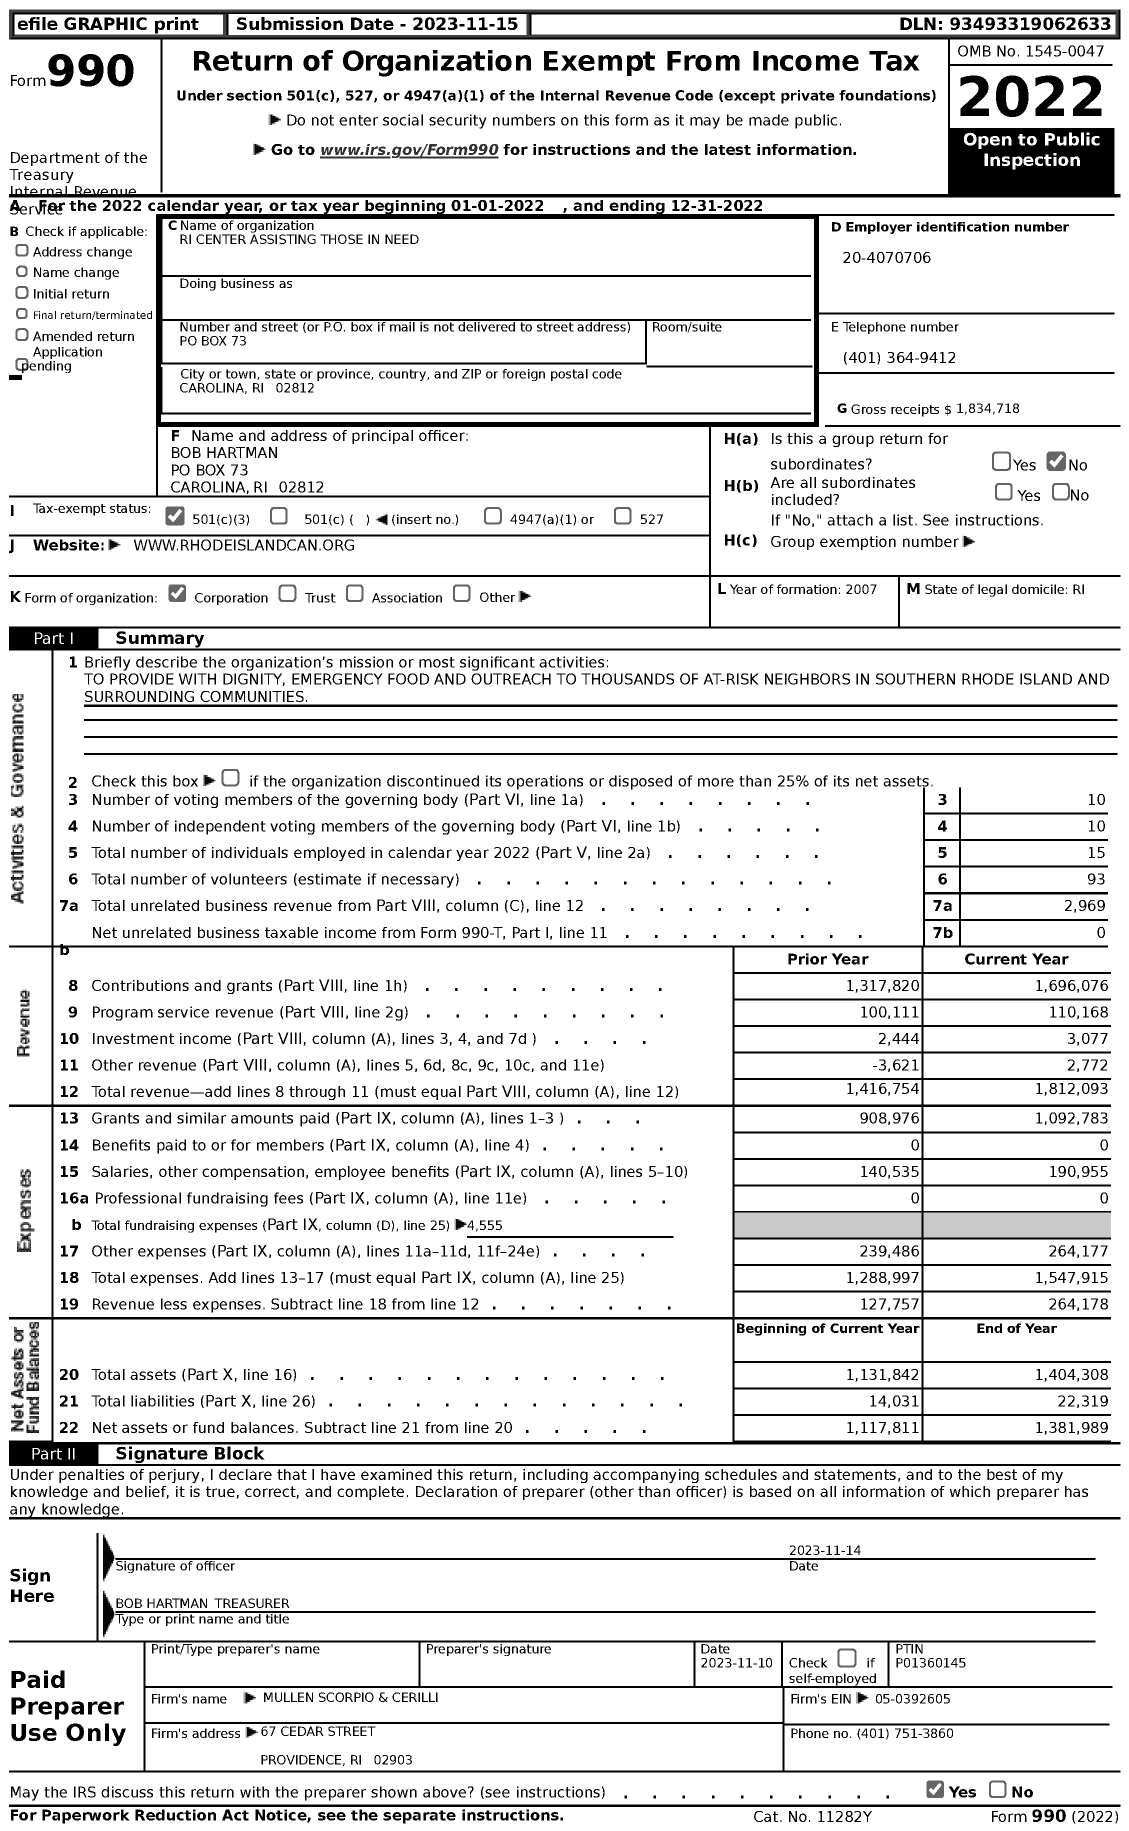 Image of first page of 2022 Form 990 for Ri Center Assisting Those in Need